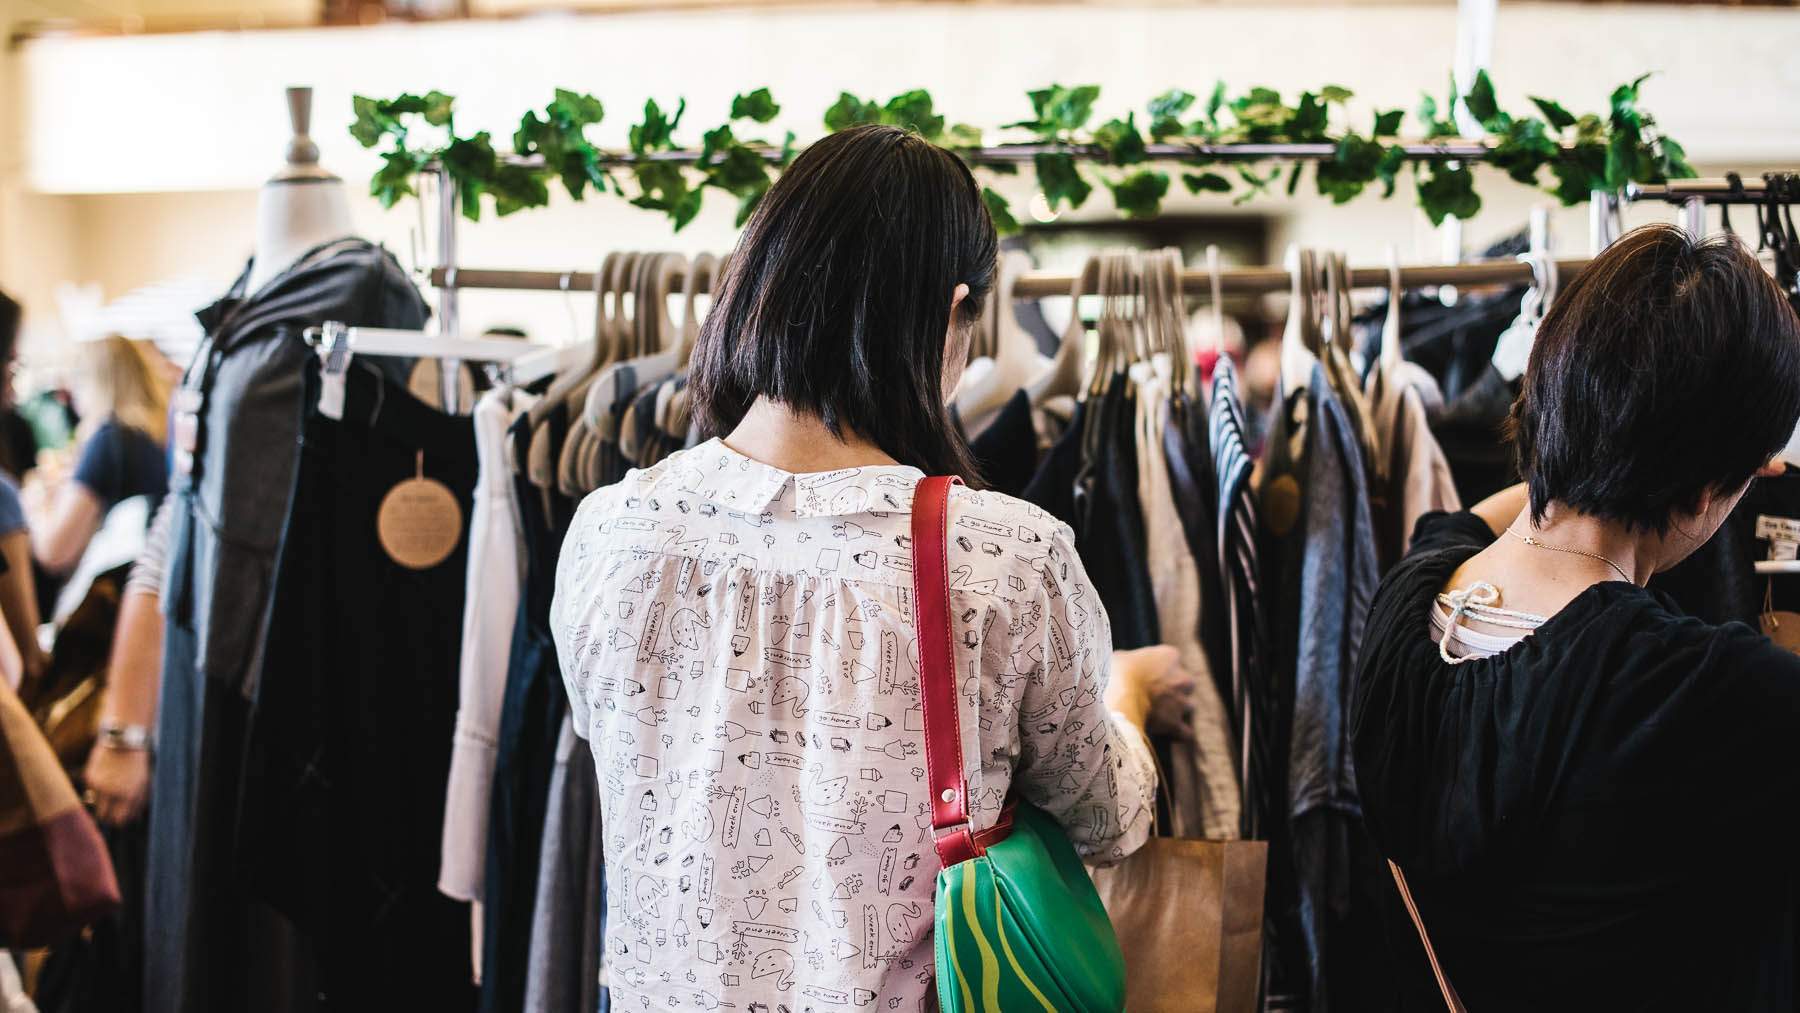 Sydney's New Slow Fashion Market Is Dedicated to Ethical and Sustainable Wares